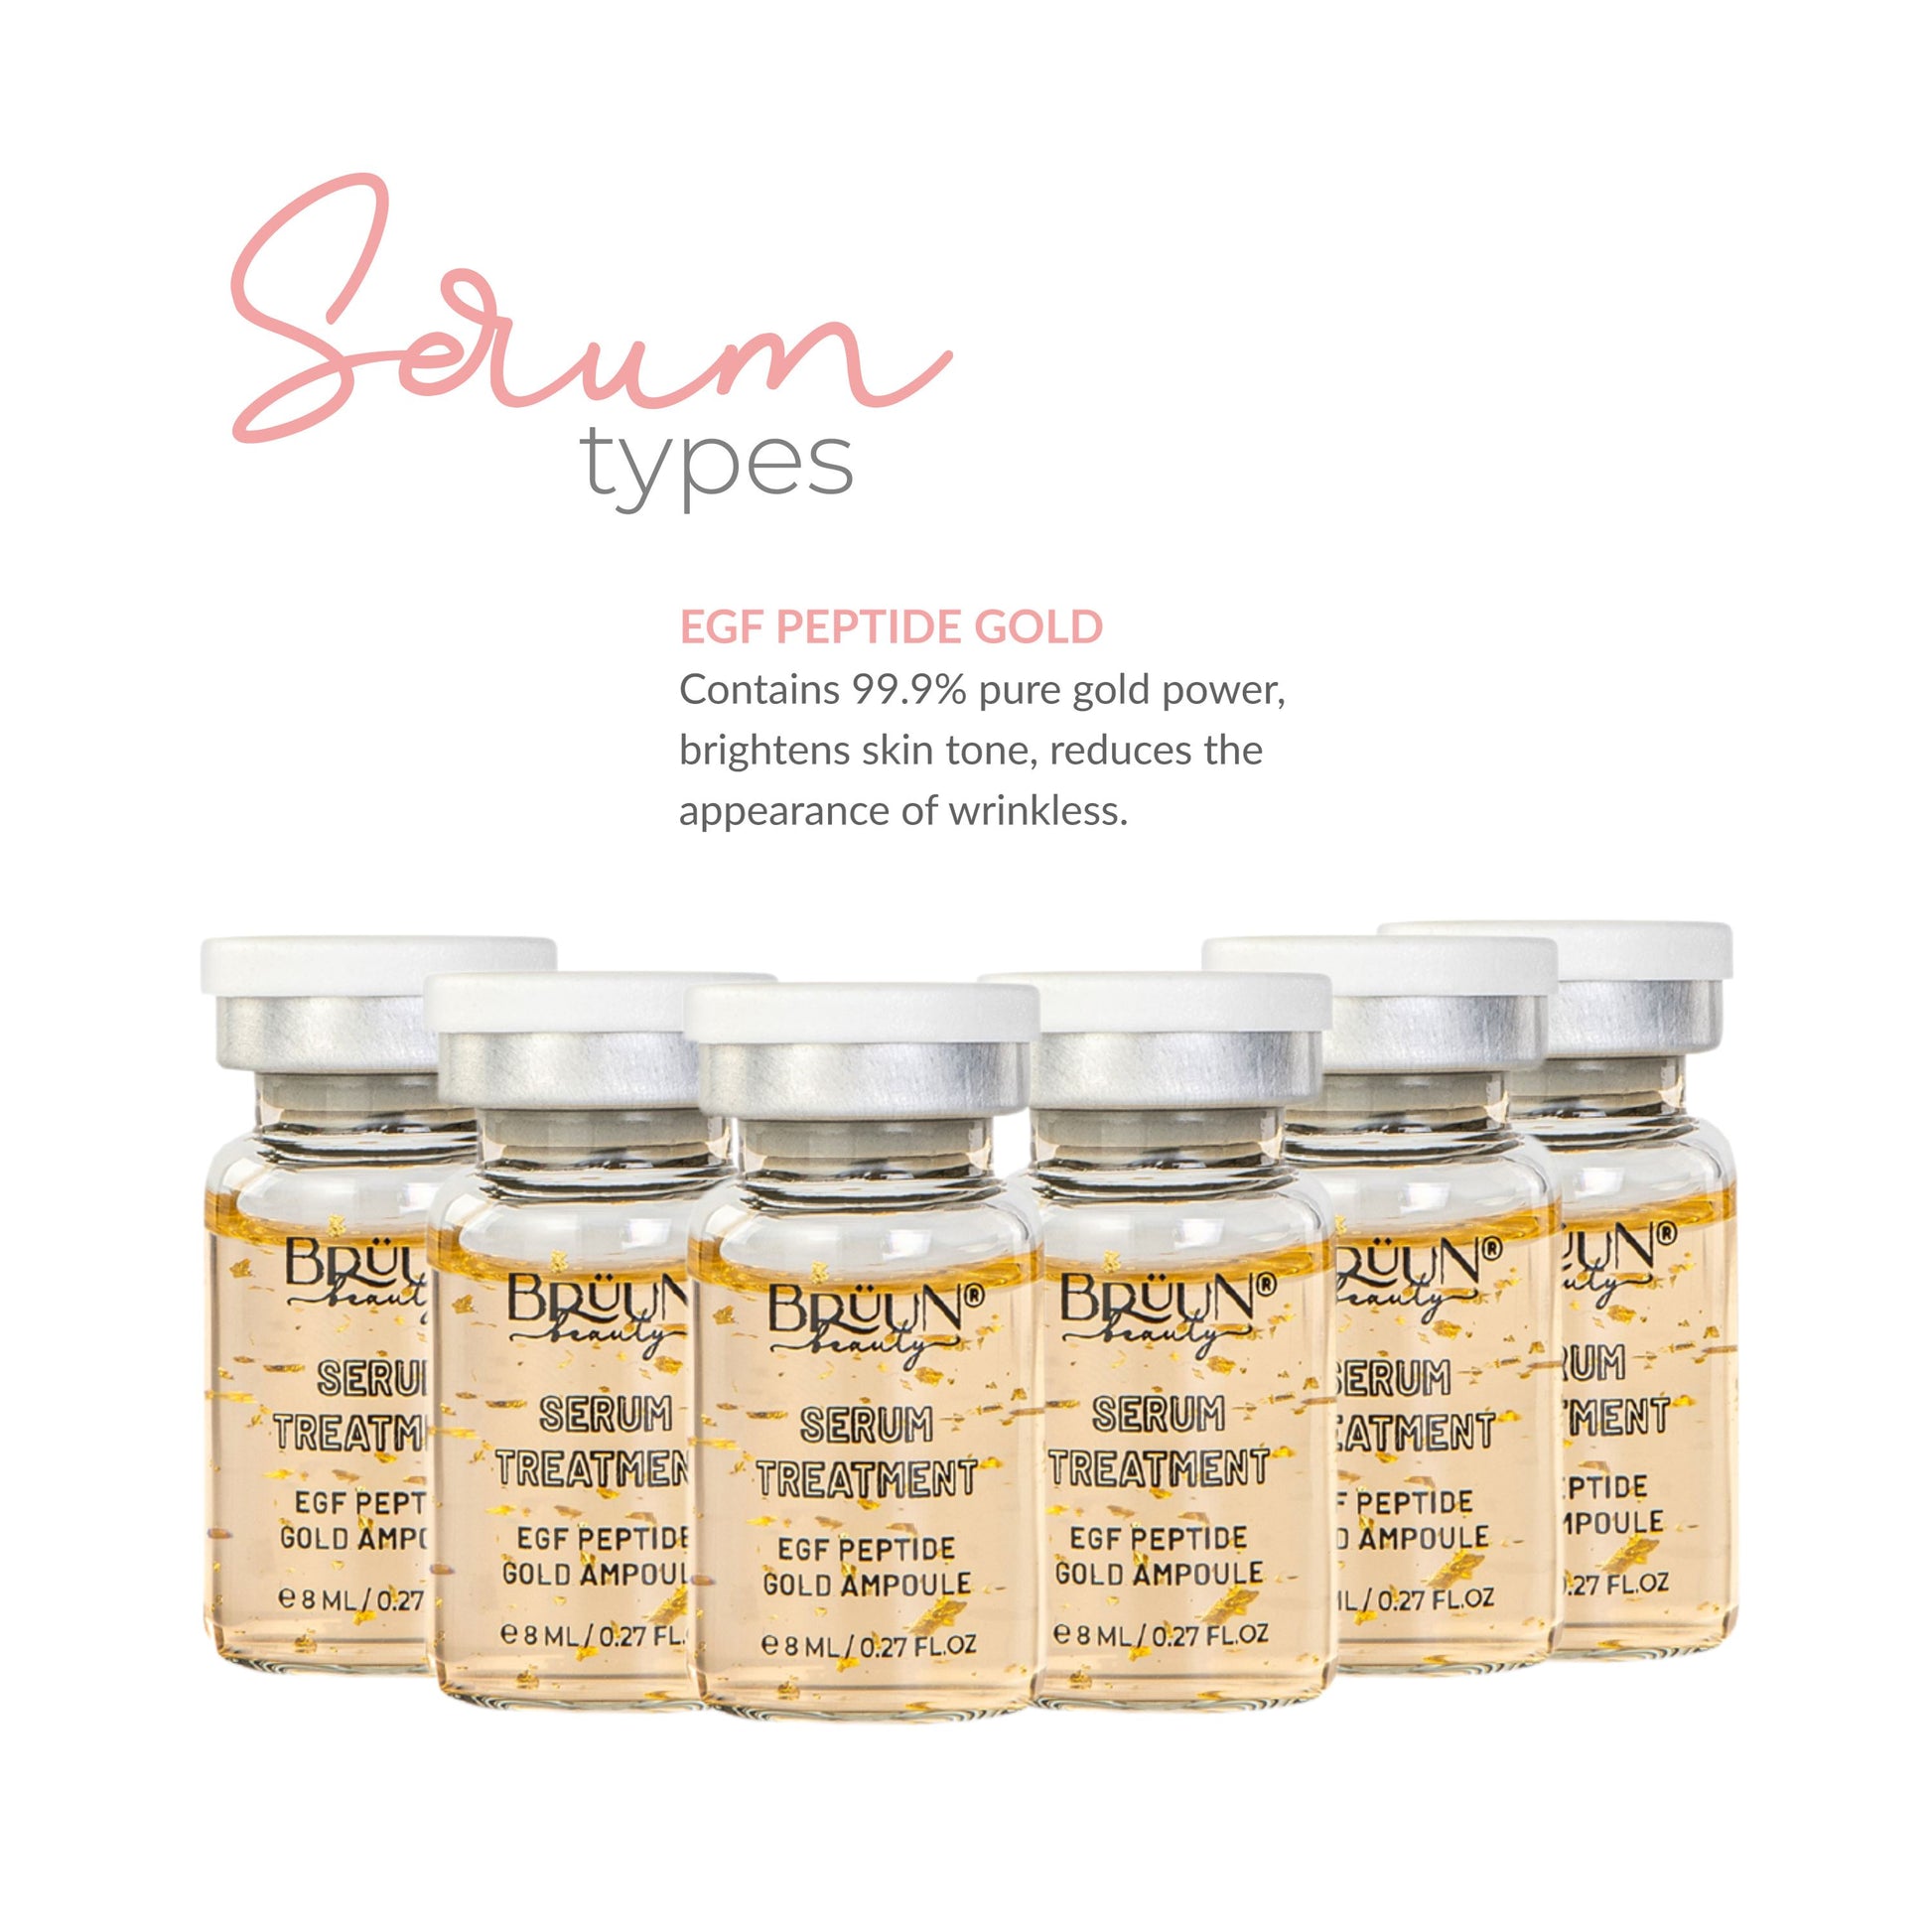 BRÜUN BB Glow Serum Ampoule – A (Pack of 6) EGF Peptide Ampoule for Skin strength and Elasticity – A Skin Care Kit for Spa, School, Estheticians use with Derma Pen for Fresh Look and Natural Beauty Results Bruun Beauty 